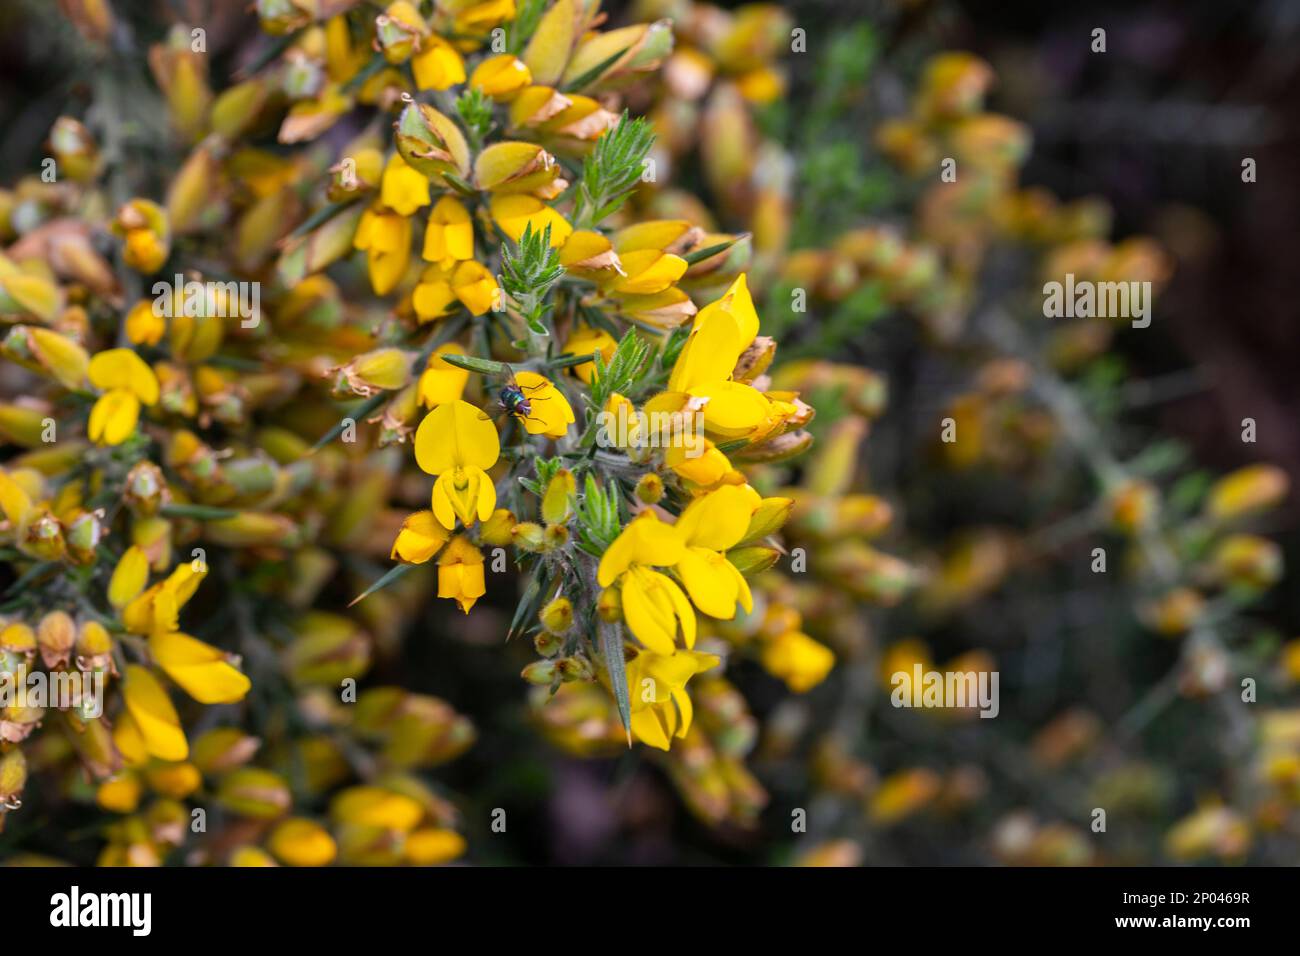 Ulex europaeus. Branches of the gorse bush with its yellow inflorescences, selective focus Stock Photo